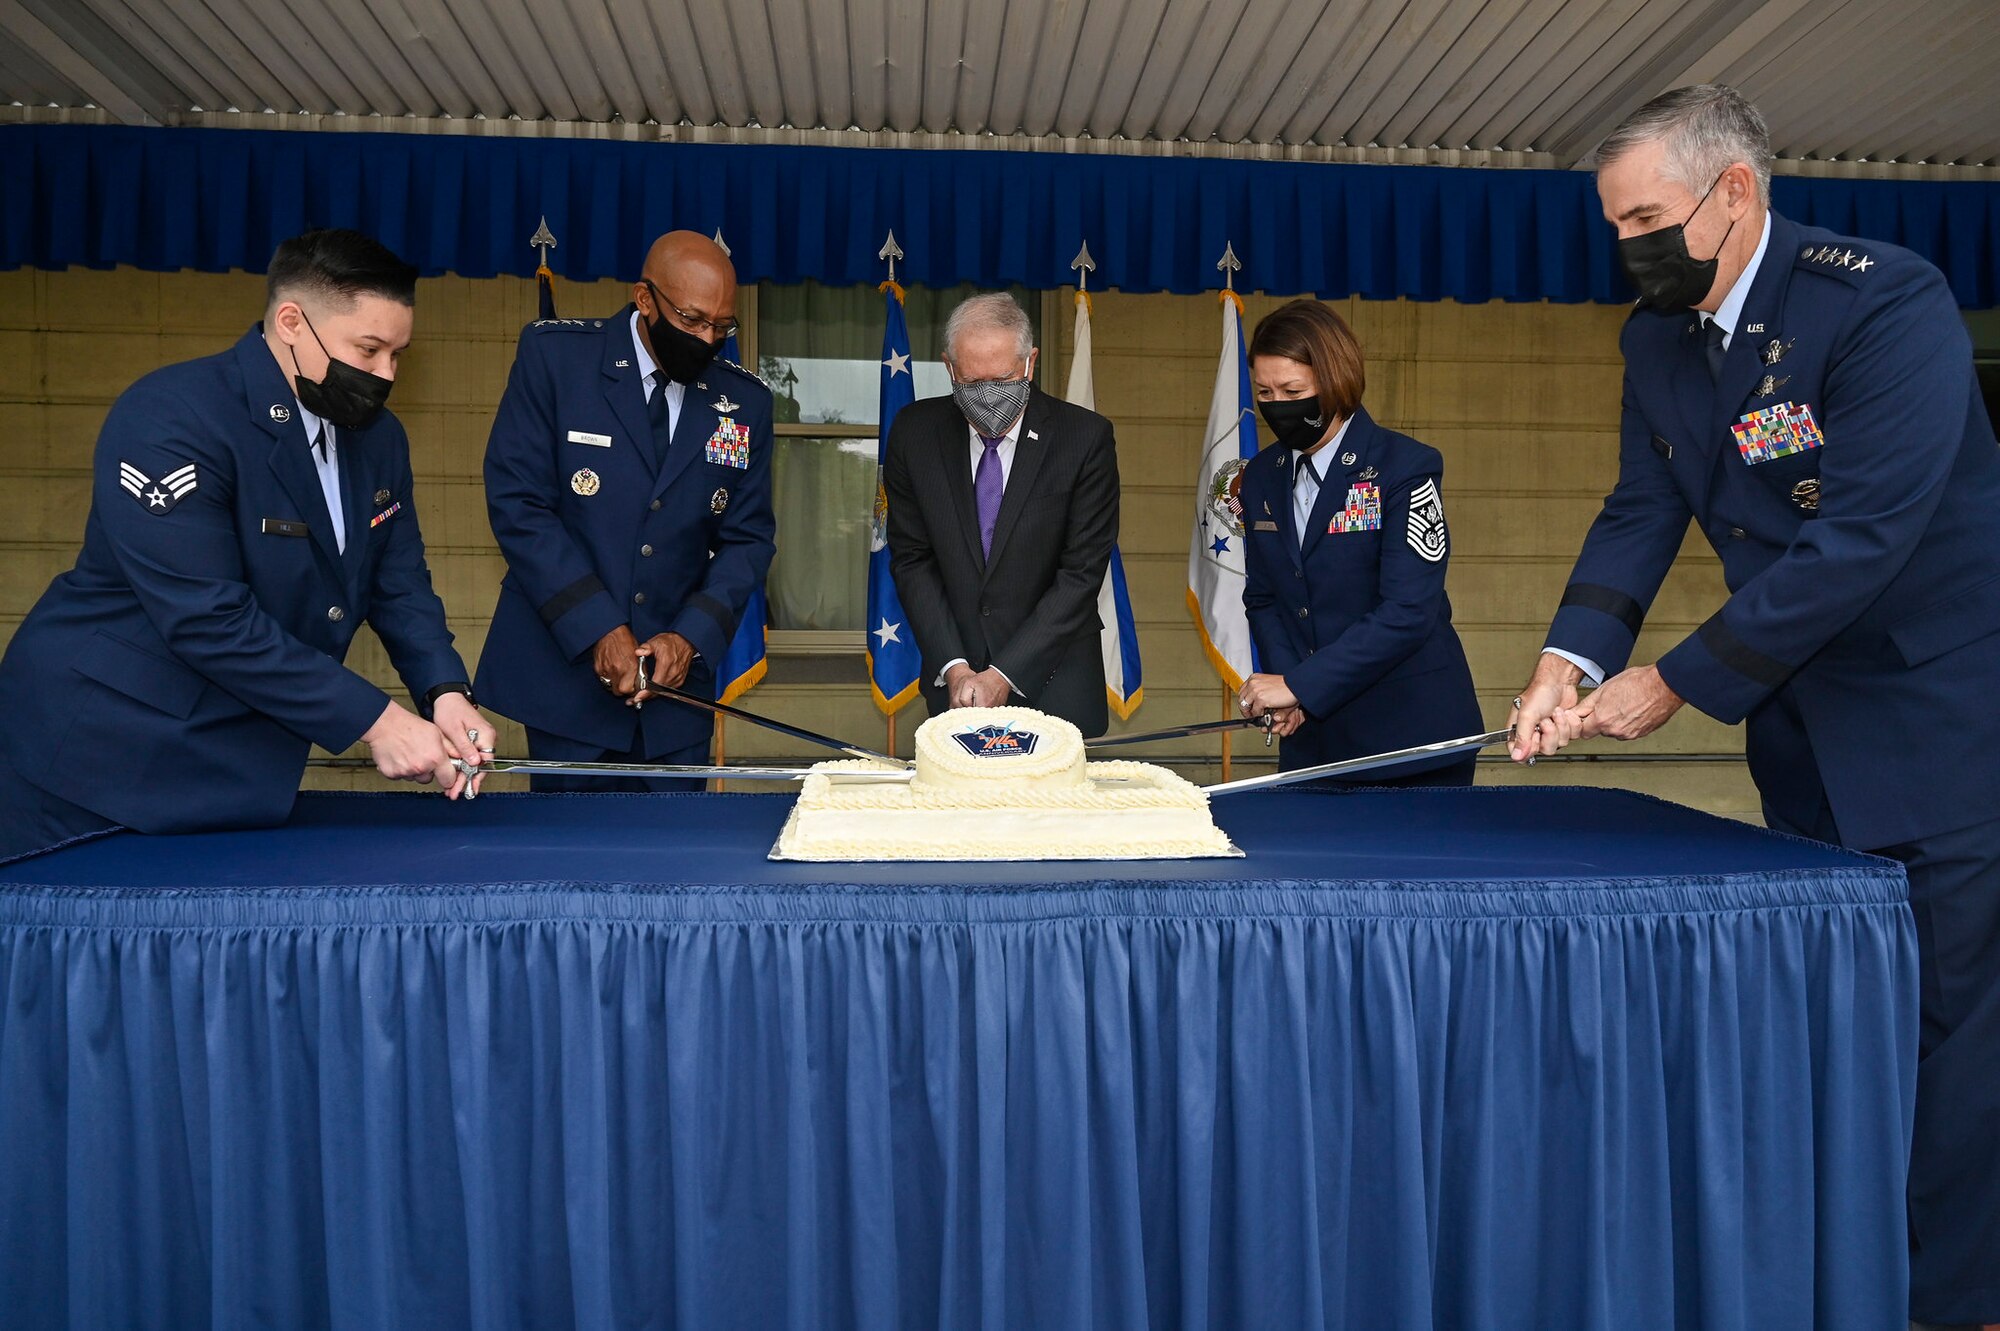 Senior Airman Alexis Hill, the youngest Airman present, Air Force Chief of Staff Gen. CQ Brown Jr., Secretary of the Air Force Frank Kendall, Chief Master Sgt. of the Air Force JoAnne S. Bass and Gen. John E. Hyten, vice chairman of the Joint Chiefs of Staff, cut a cake